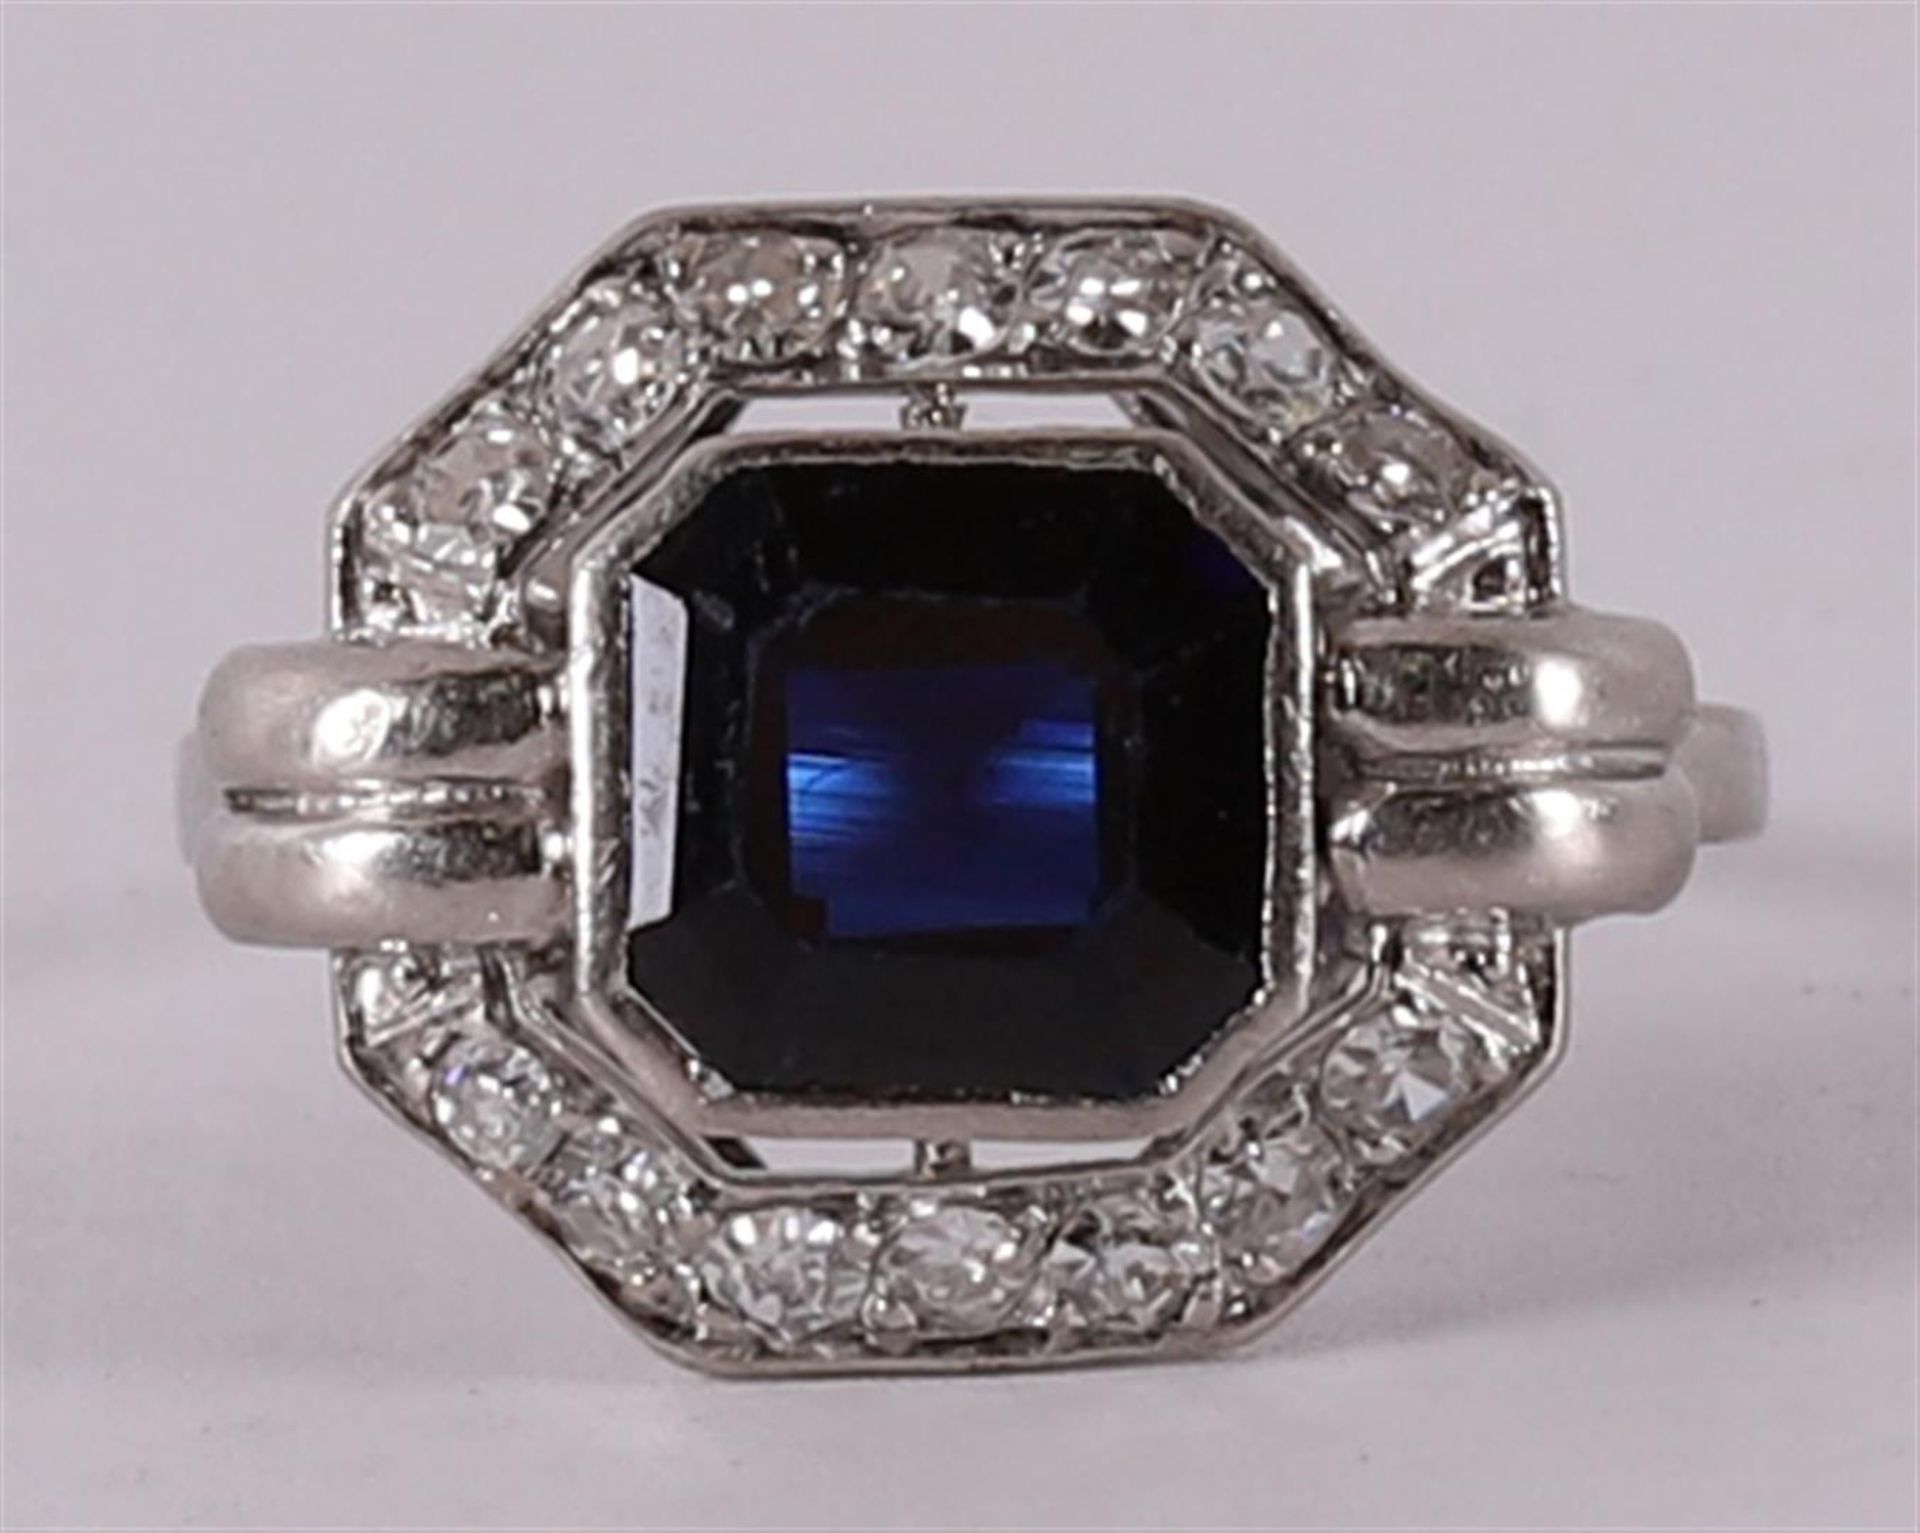 A platinum Art Deco ring with a facet cut blue sapphire and 14 diamonds.